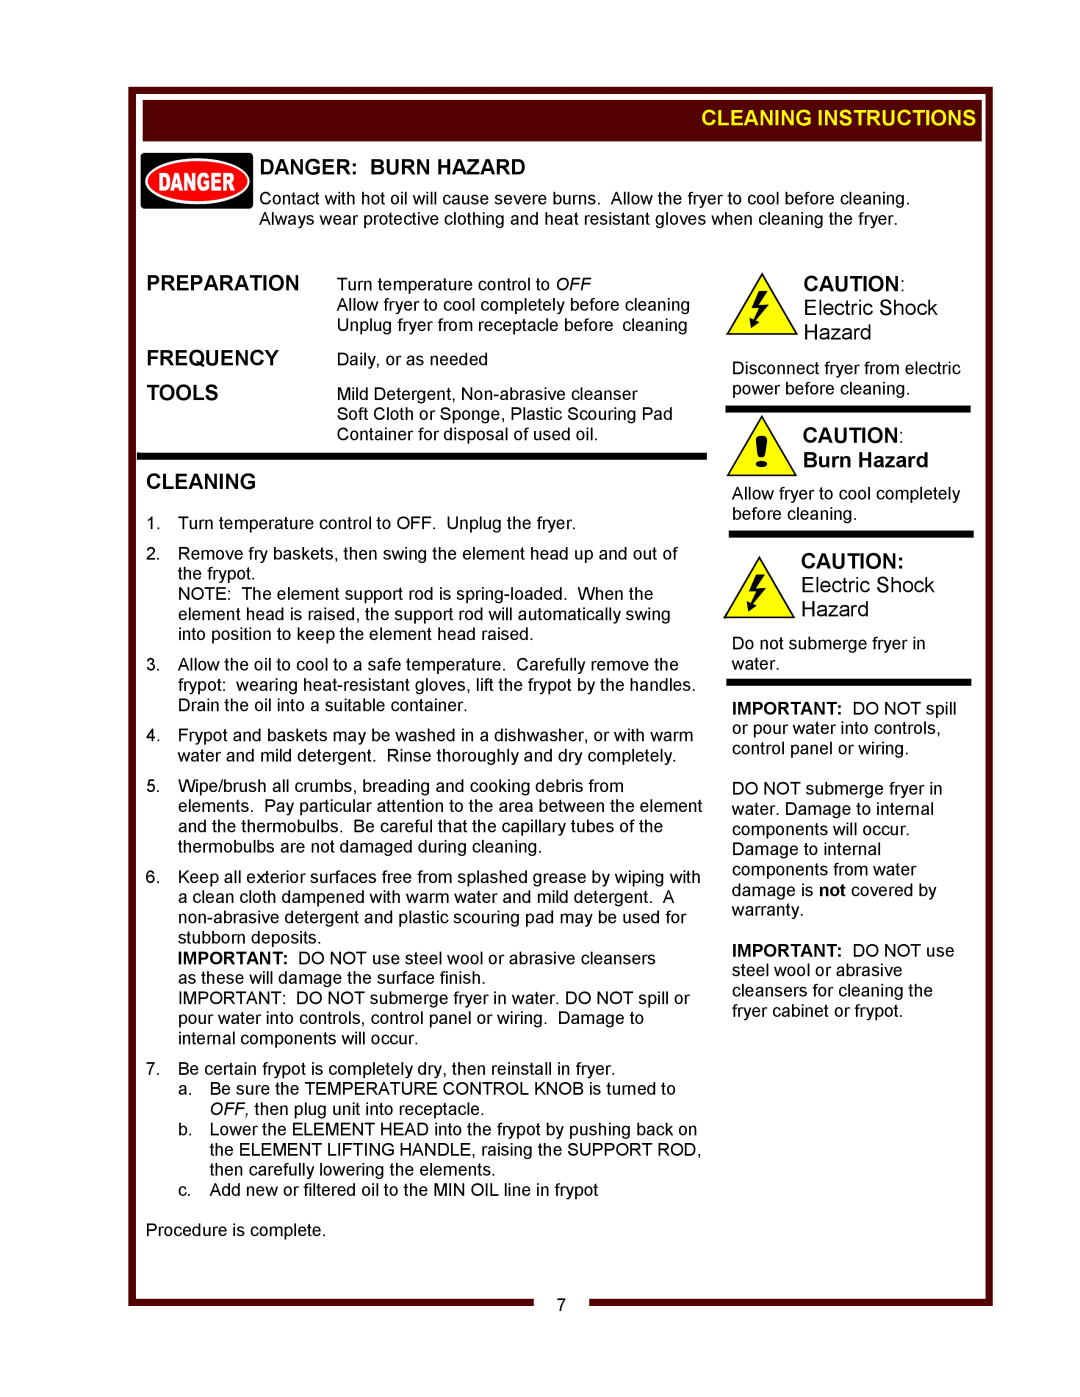 Wells Model LLF-14 operation manual Cleaning Instructions, Preparation, Frequency, Tools, Danger Burn Hazard 